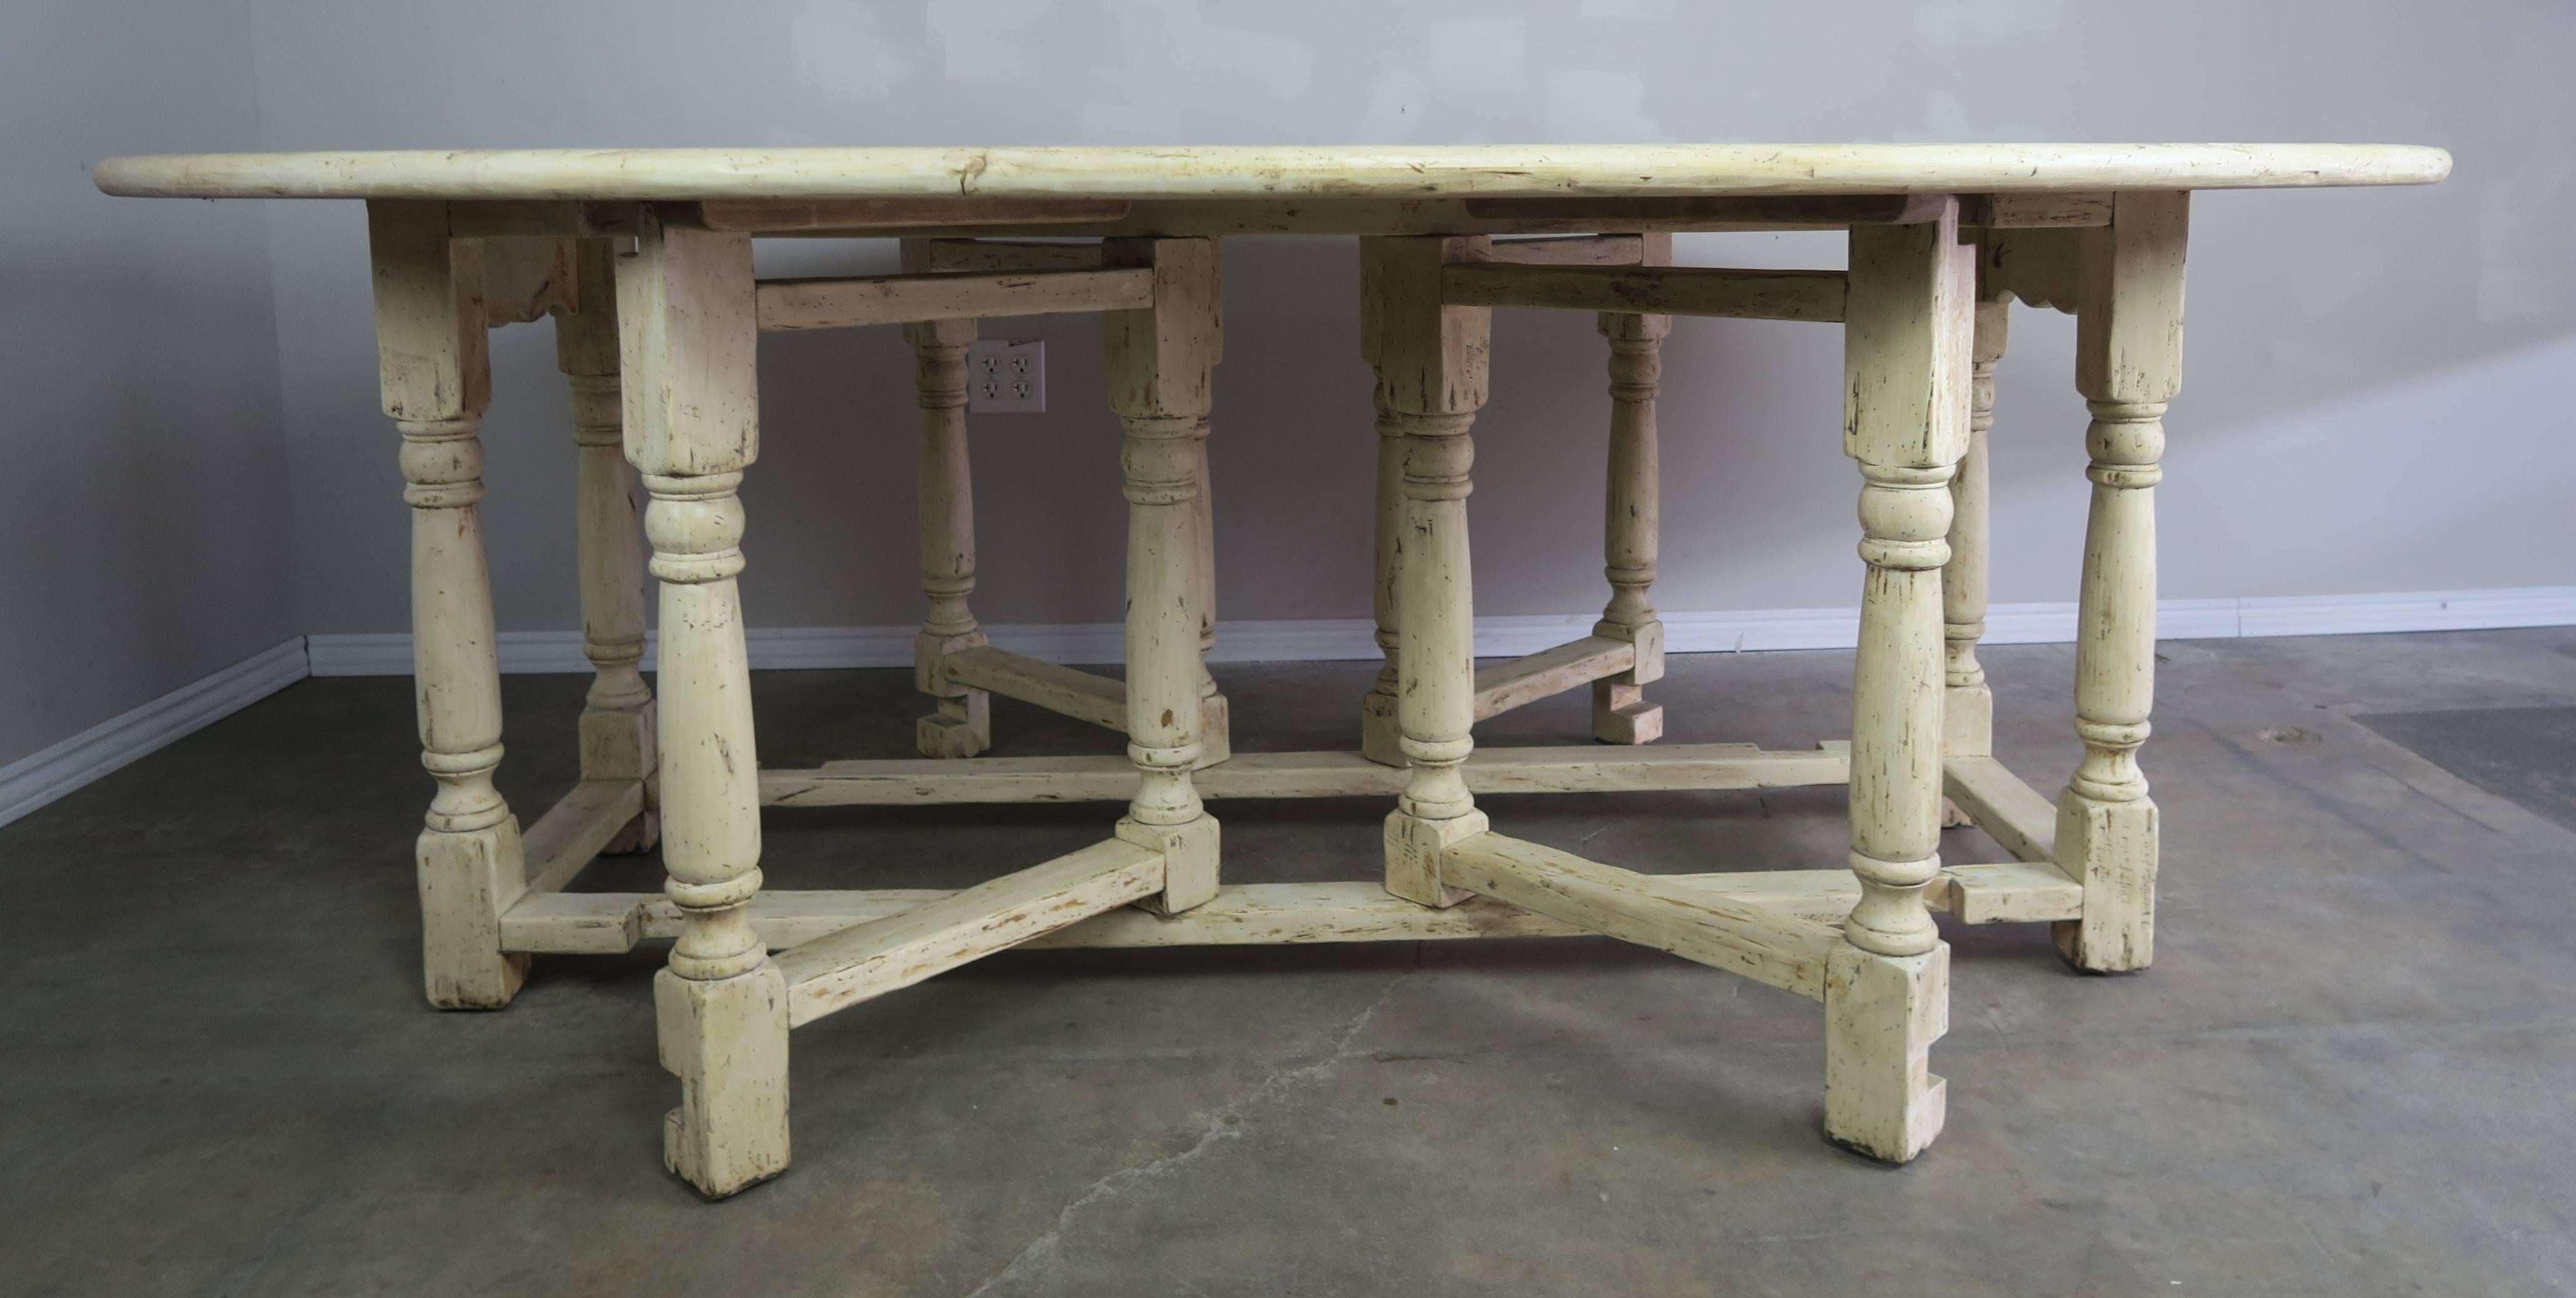 19th century Charles II English bleached walnut gateleg table. Ralph Edwards discusses gate-leg tables in ‘The Dictionary of English Furniture: Volume Three’ (Antique Collectors’ Club, Woodbridge, Suffolk, 1983), pp.234-241. He explains that: ‘The